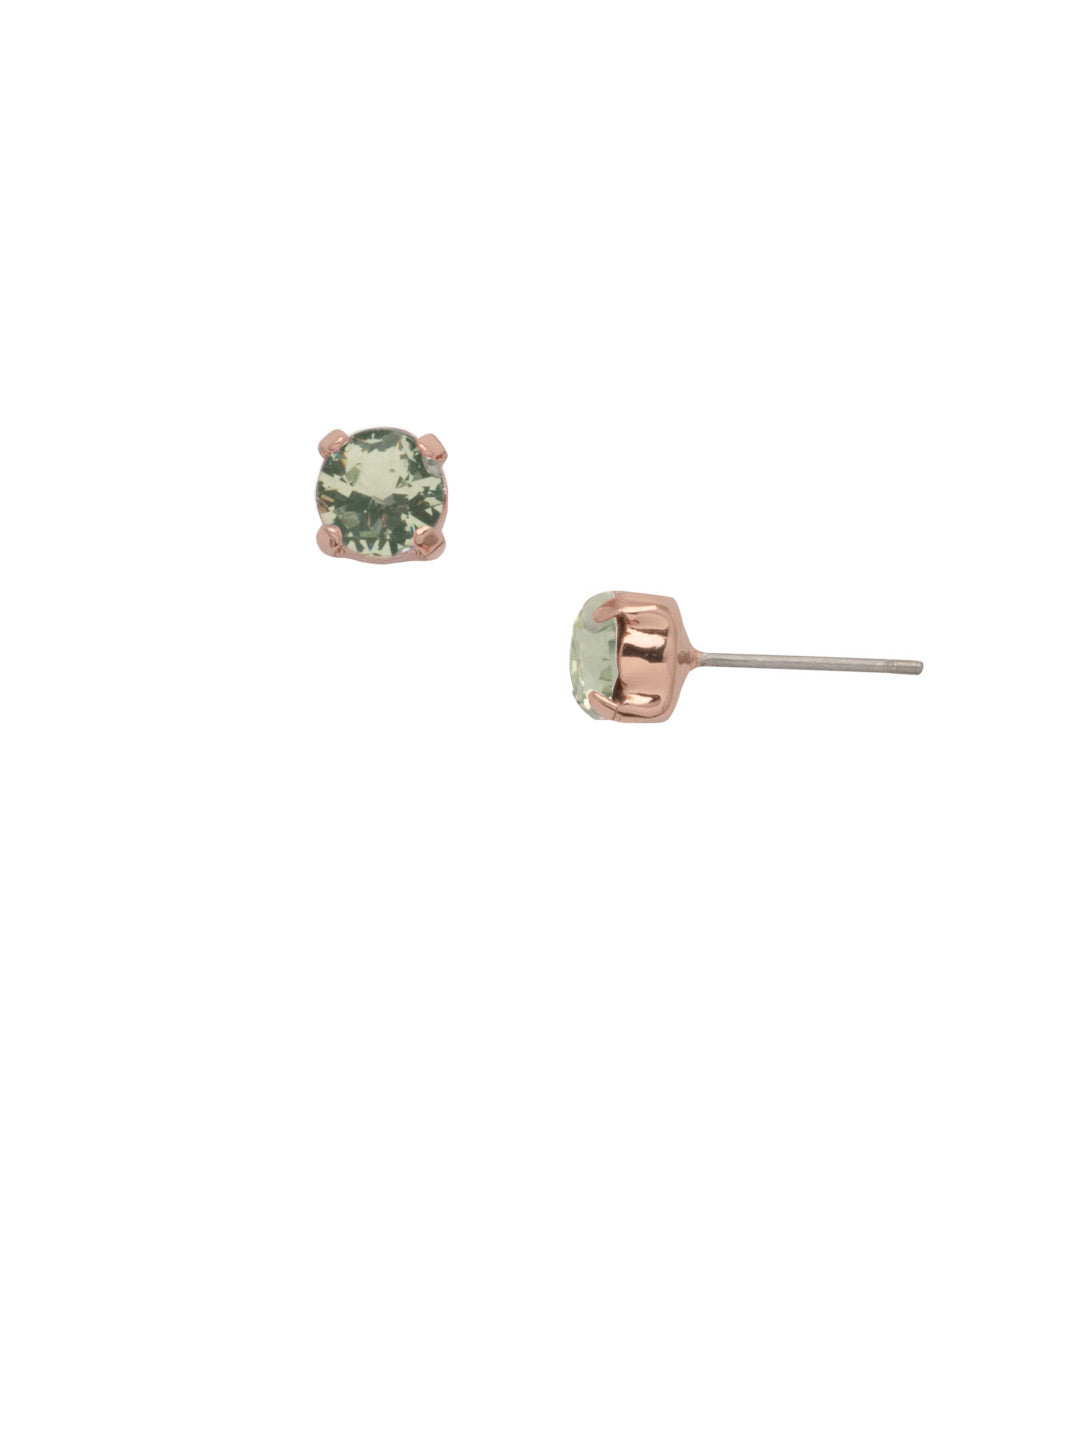 Jayda Stud Earrings - EDN32RGMIN - <p>The Jayda Stud Earrings are the perfect every day wardrobe staple. A round crystal nestles perfectly in a metal plated post with four prongs. </p><p>Need help picking a stud? <a href="https://www.sorrelli.com/blogs/sisterhood/round-stud-earrings-101-a-rundown-of-sizes-styles-and-sparkle">Check out our size guide!</a> From Sorrelli's Mint collection in our Rose Gold-tone finish.</p>